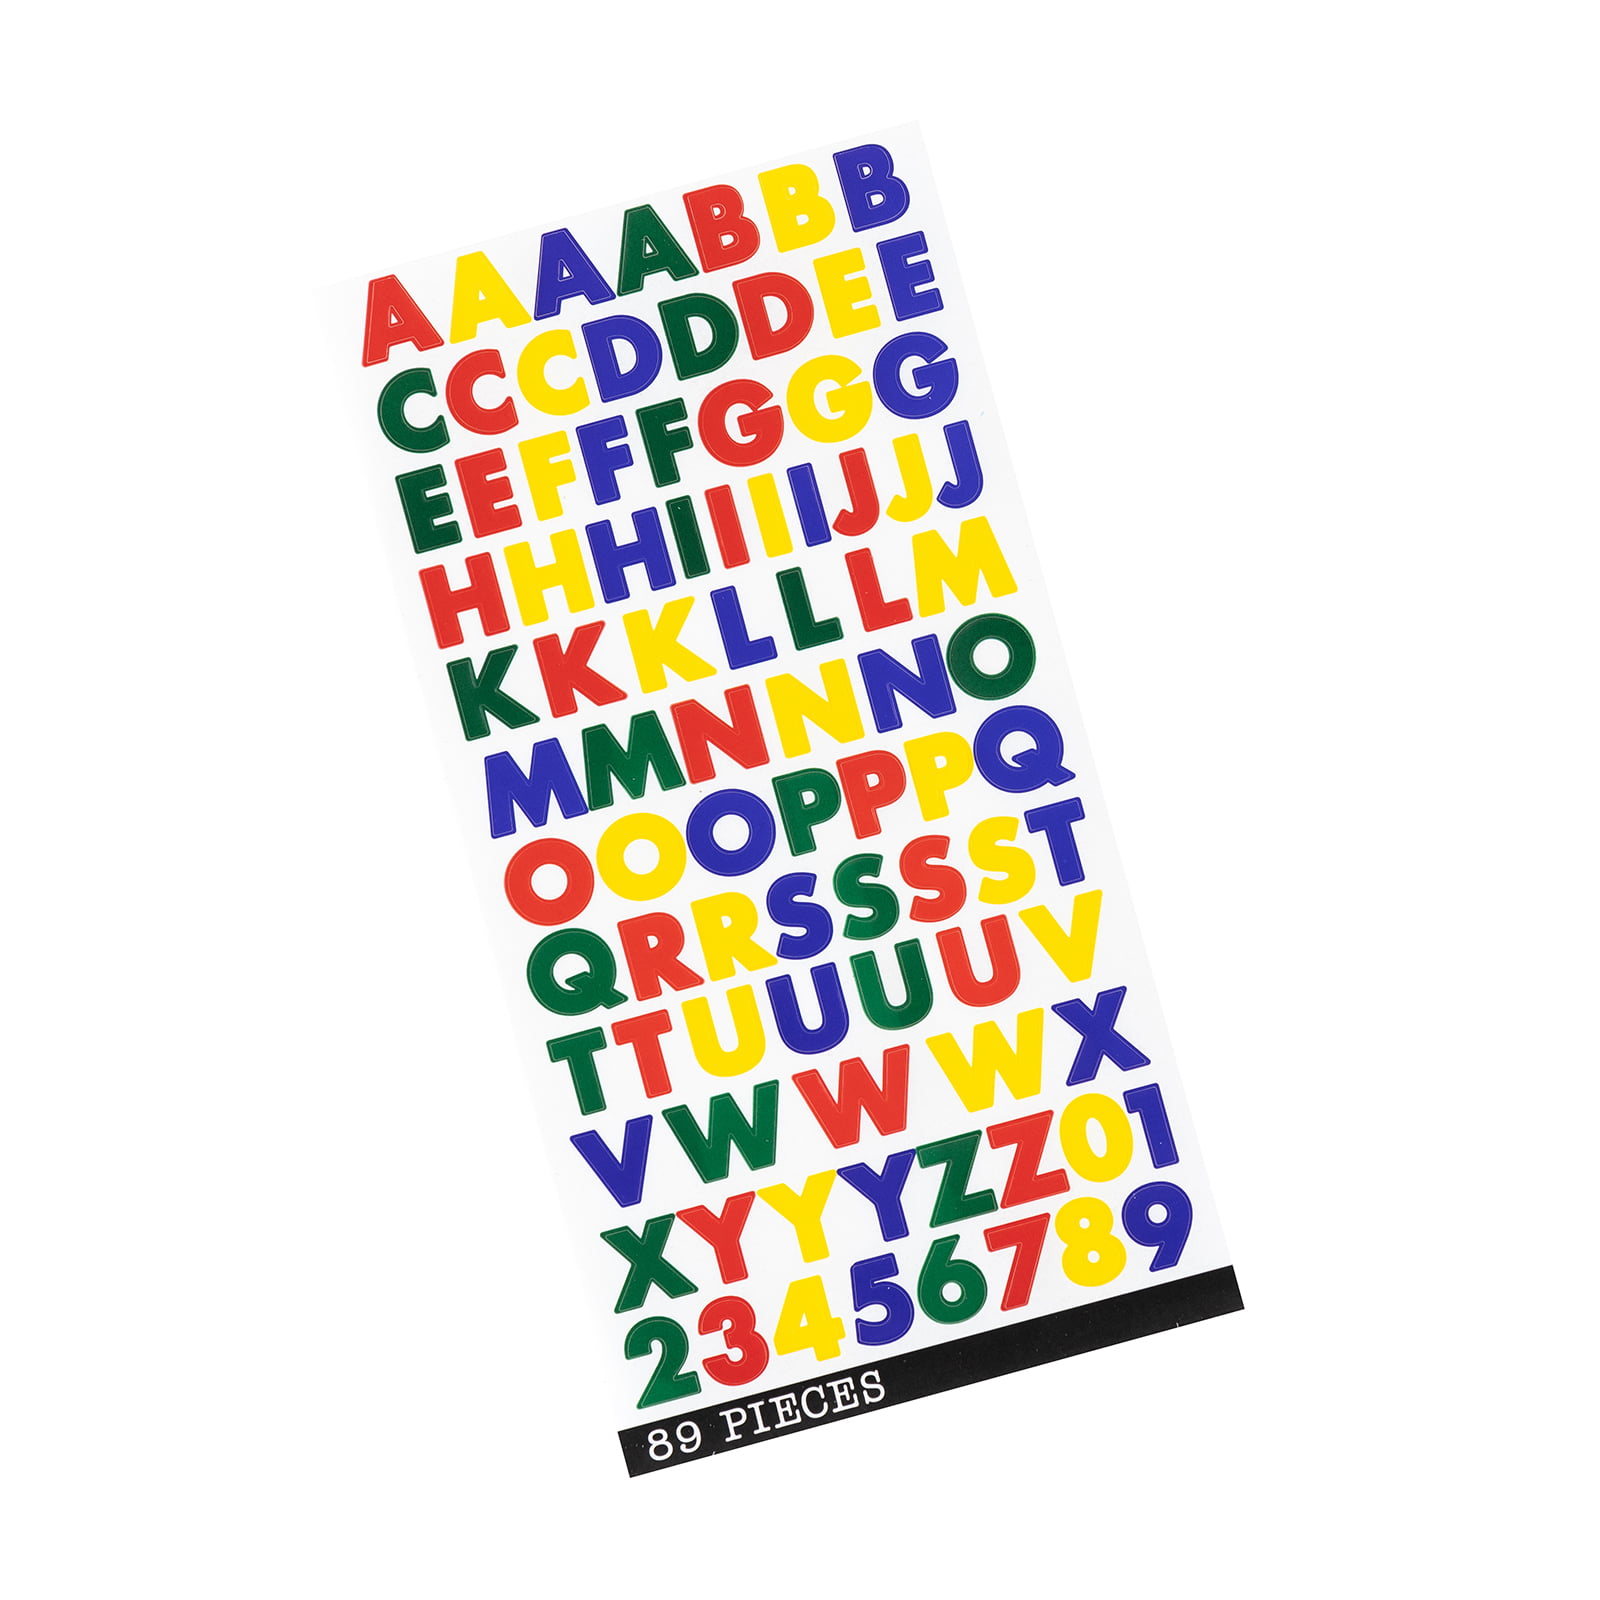 Sticko Alphabet Stickers - White Futura Bold Small - Alphabet Stickers -  White Futura Bold Small . shop for Sticko products in India.